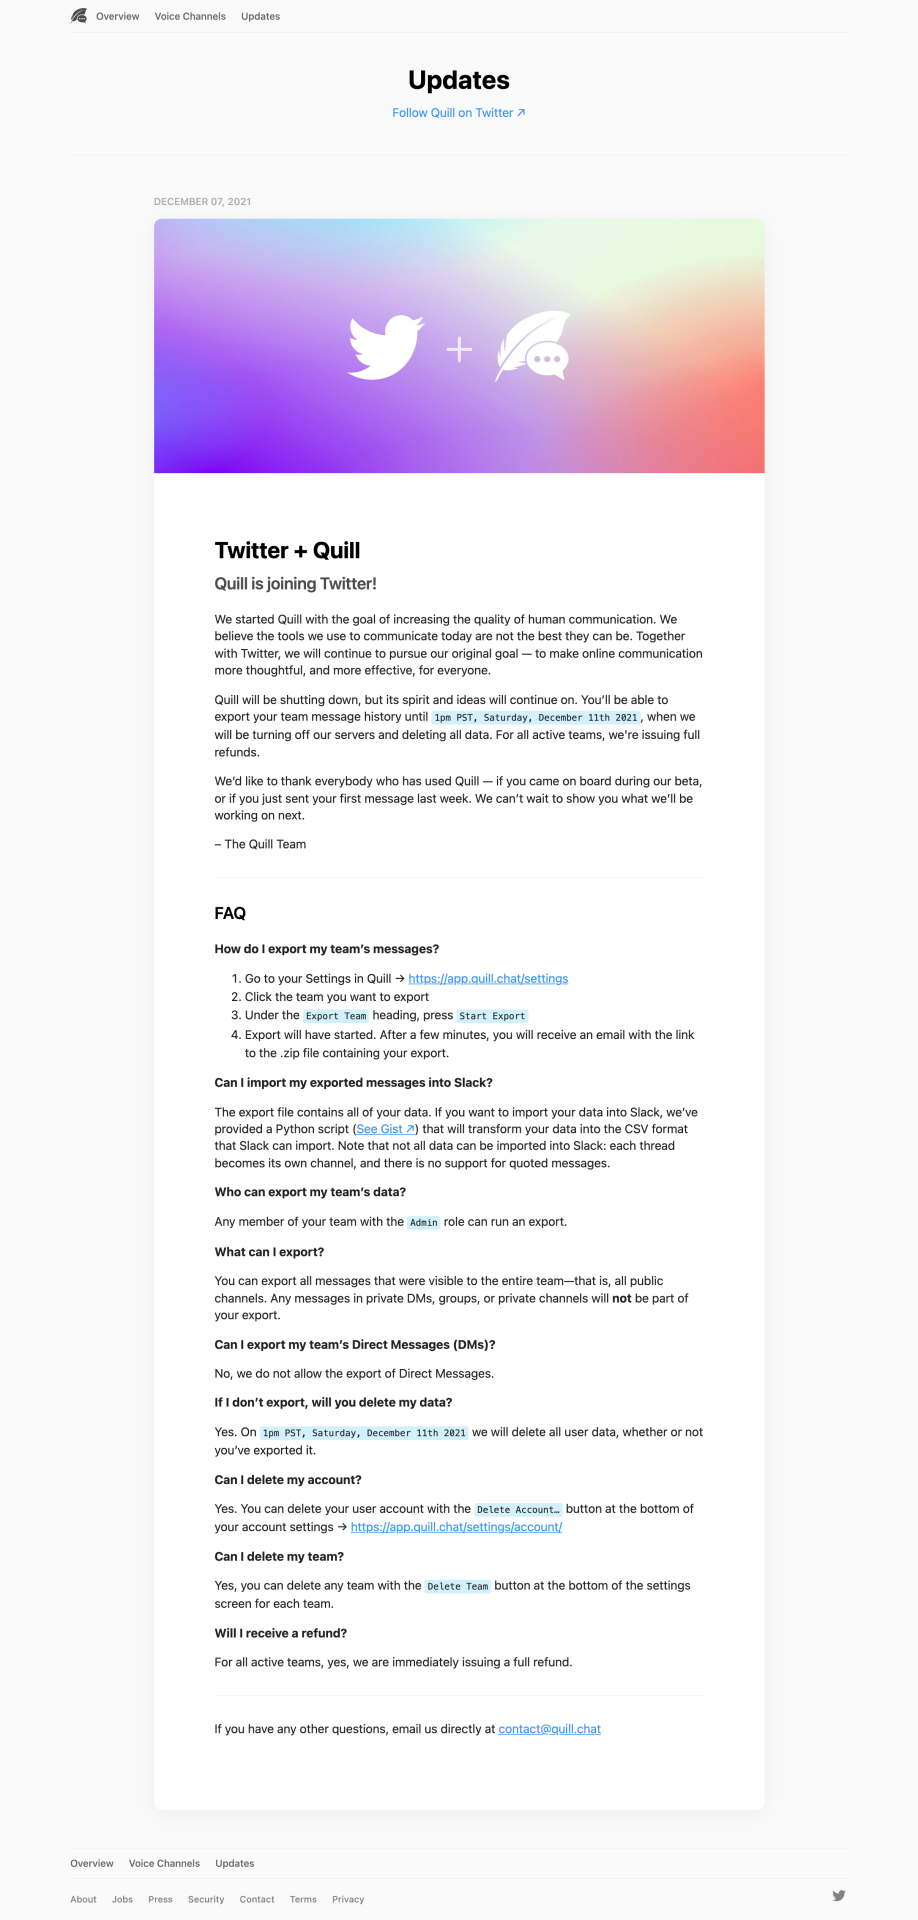 7 December 2021:
Quill is joining Twitter!“We started Quill with the goal of increasing the quality of human communication. …
… You’ll be able to export your team message history until 1pm PST, Saturday, December 11th 2021, when we will be turning...